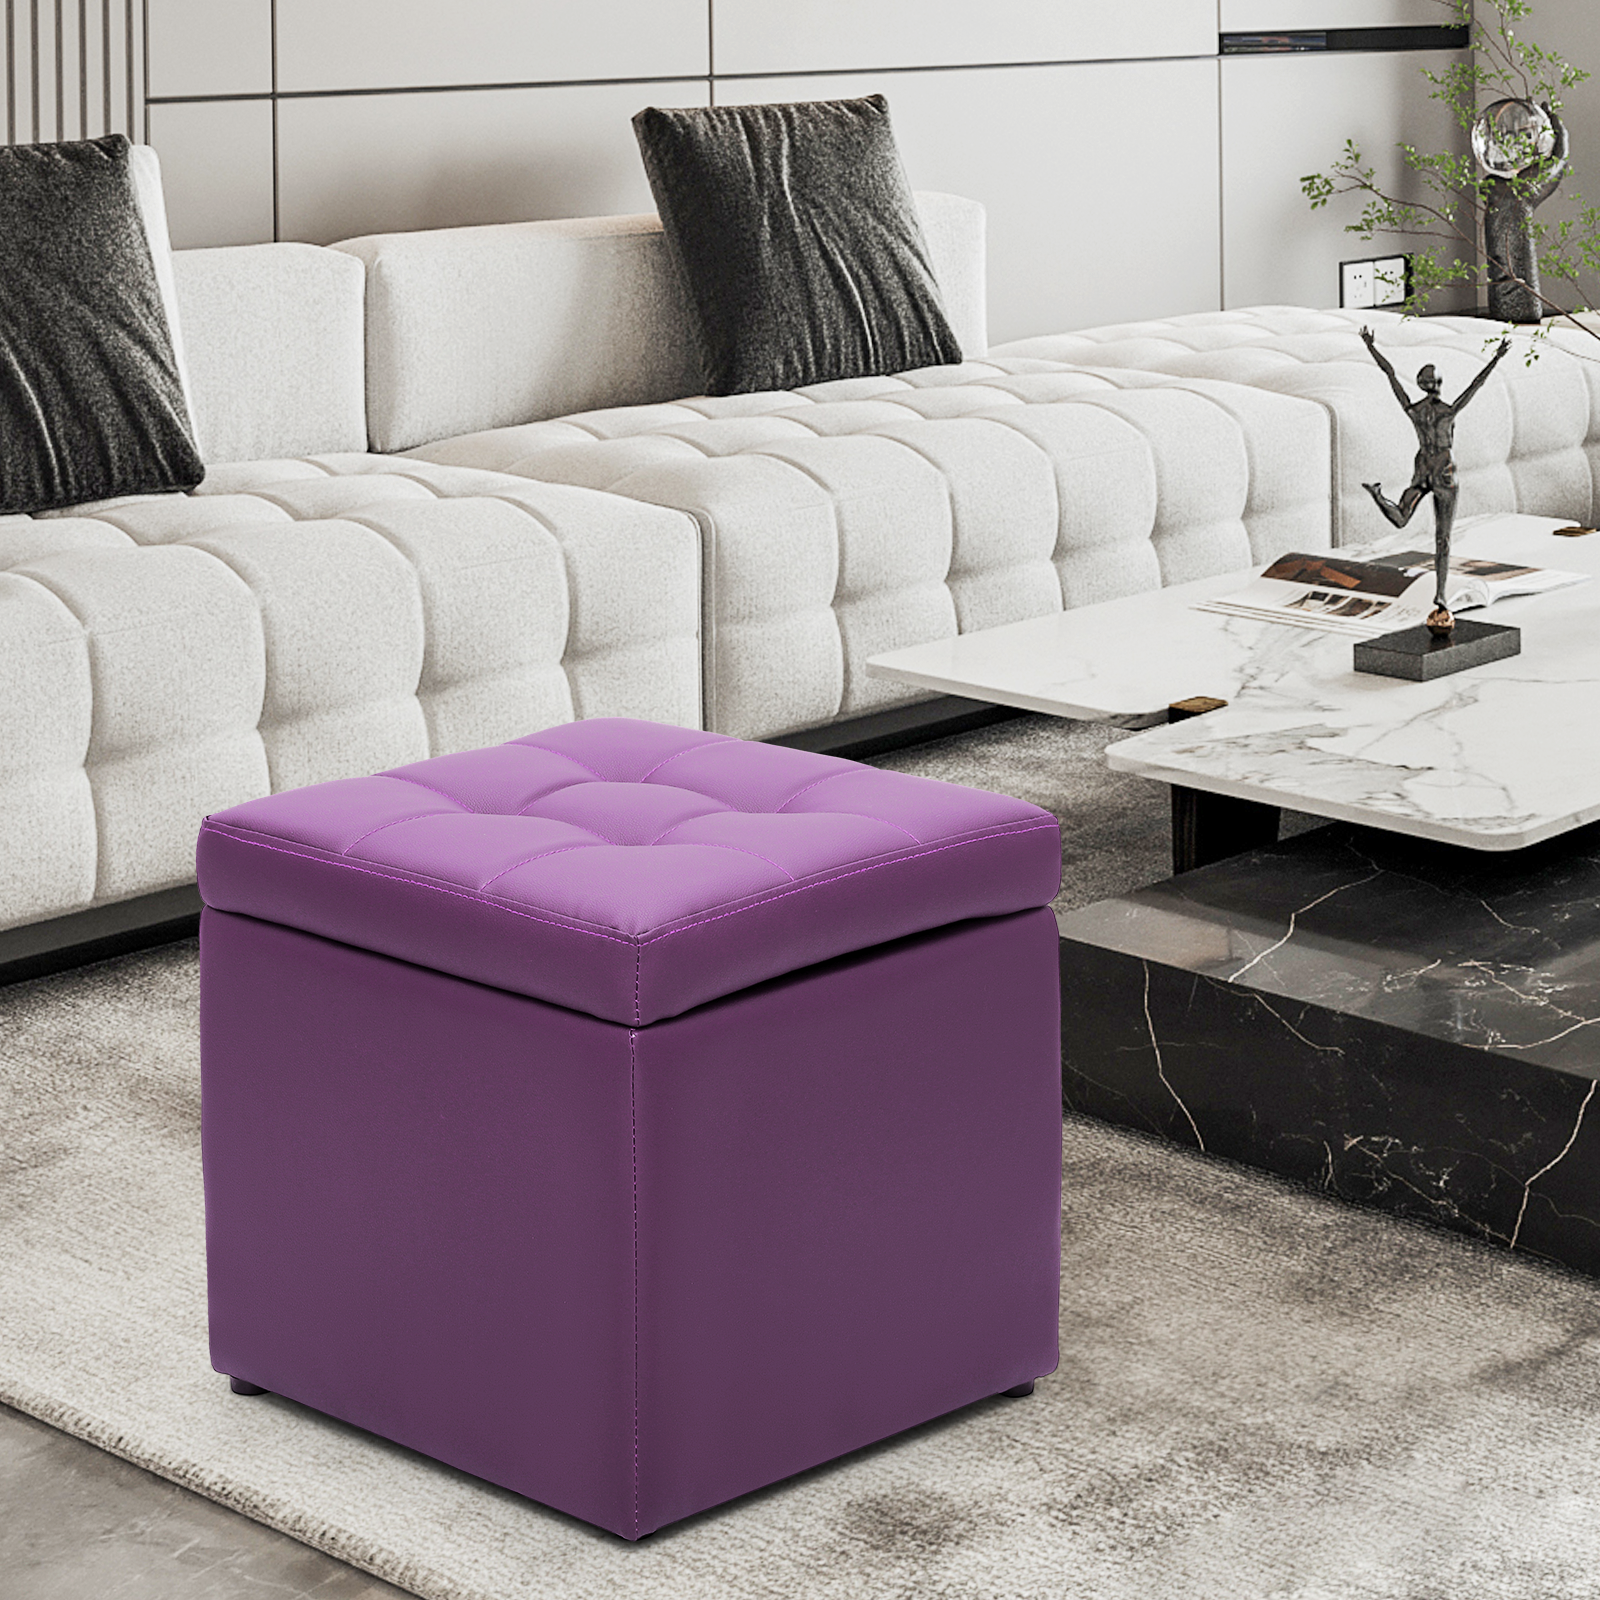 MoNiBloom 16" Square Button Tufted Storage Ottoman, PU Leather Entryway Shoe Bench, Livingroom Lift Top Pouffe Storage Cube Footstool, Purple - image 5 of 9